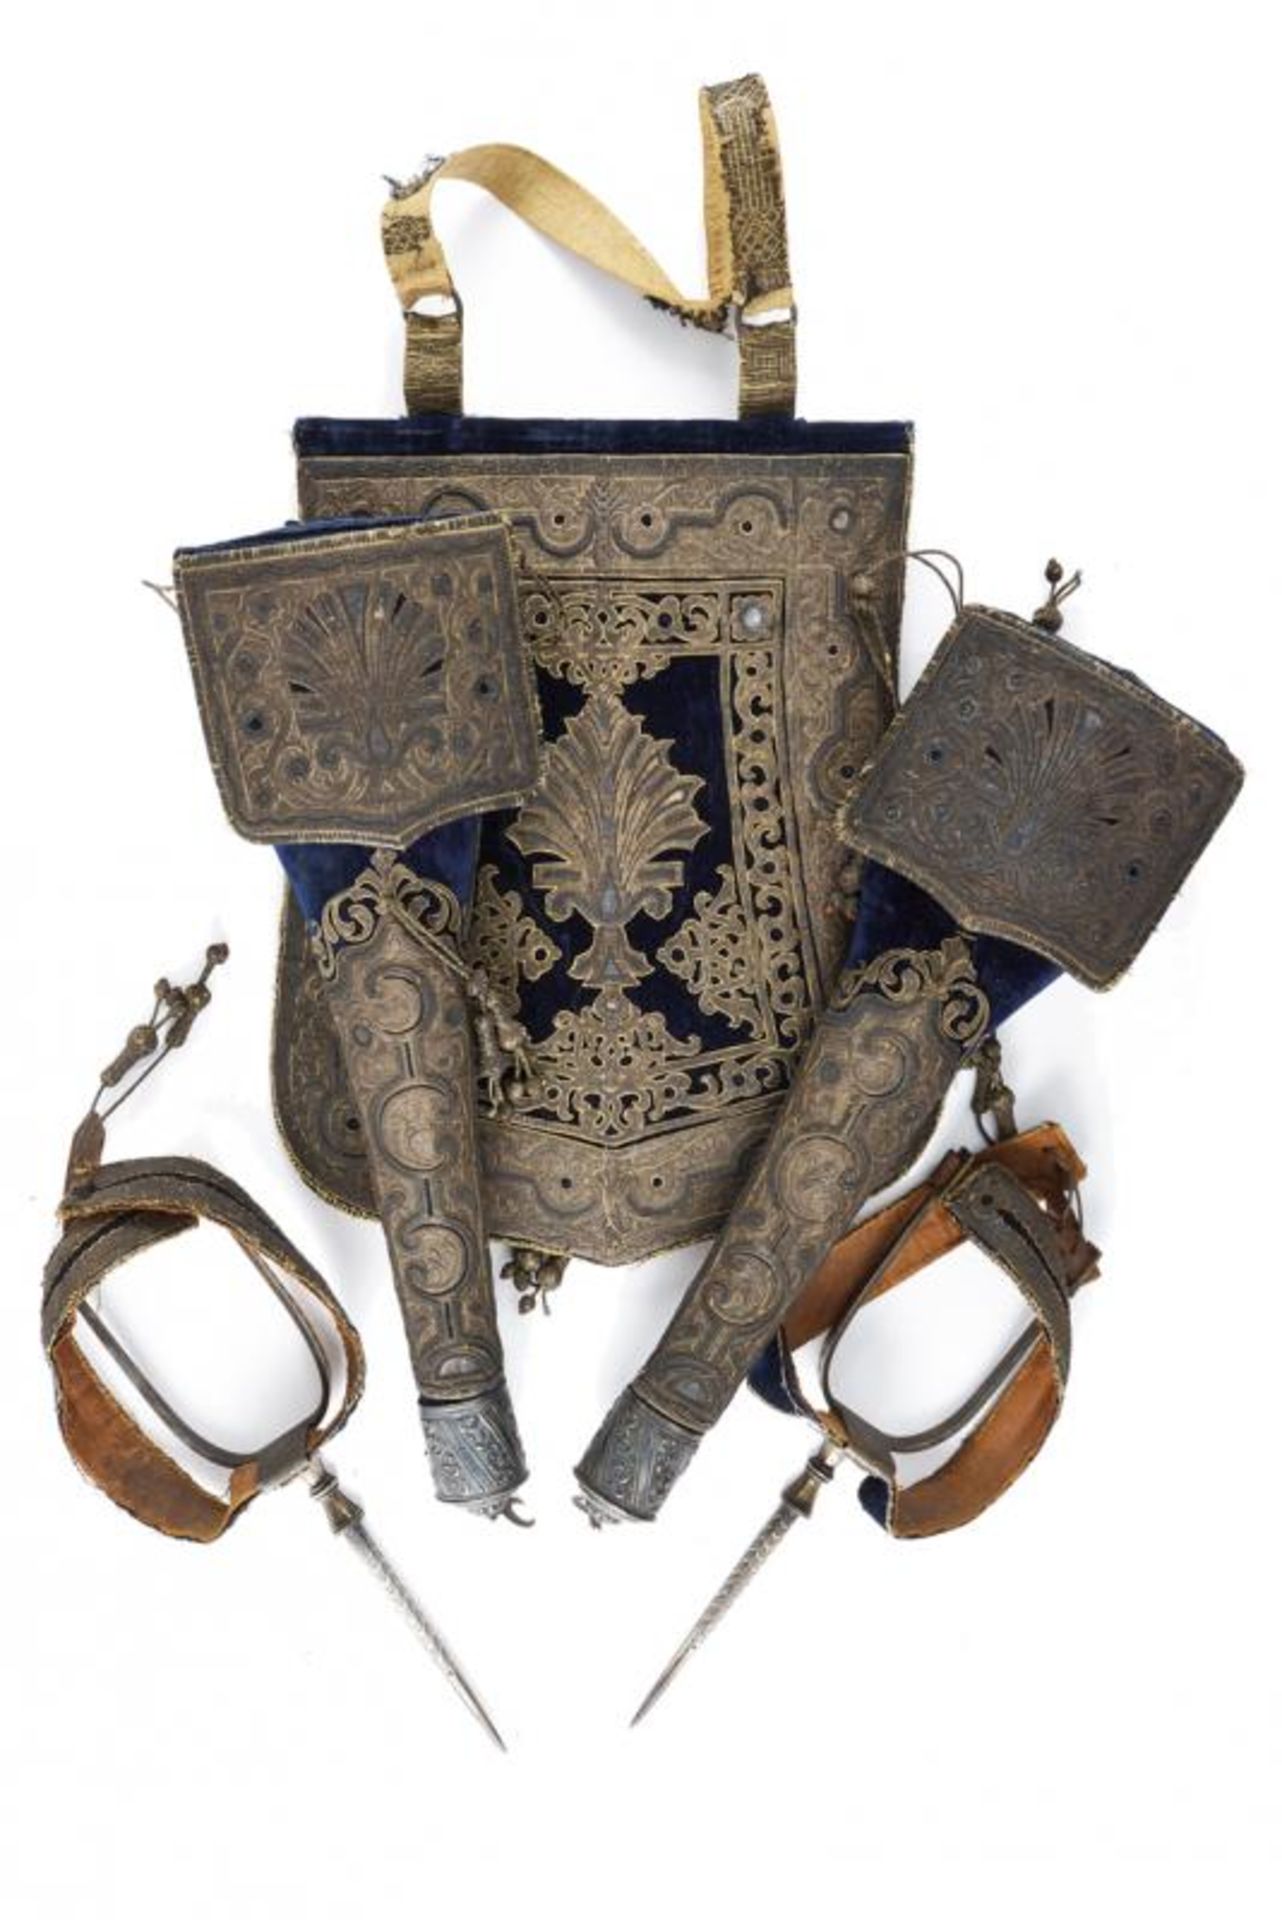 A fine ensemble of a pair of saddle holsters, spurs and a sabretache